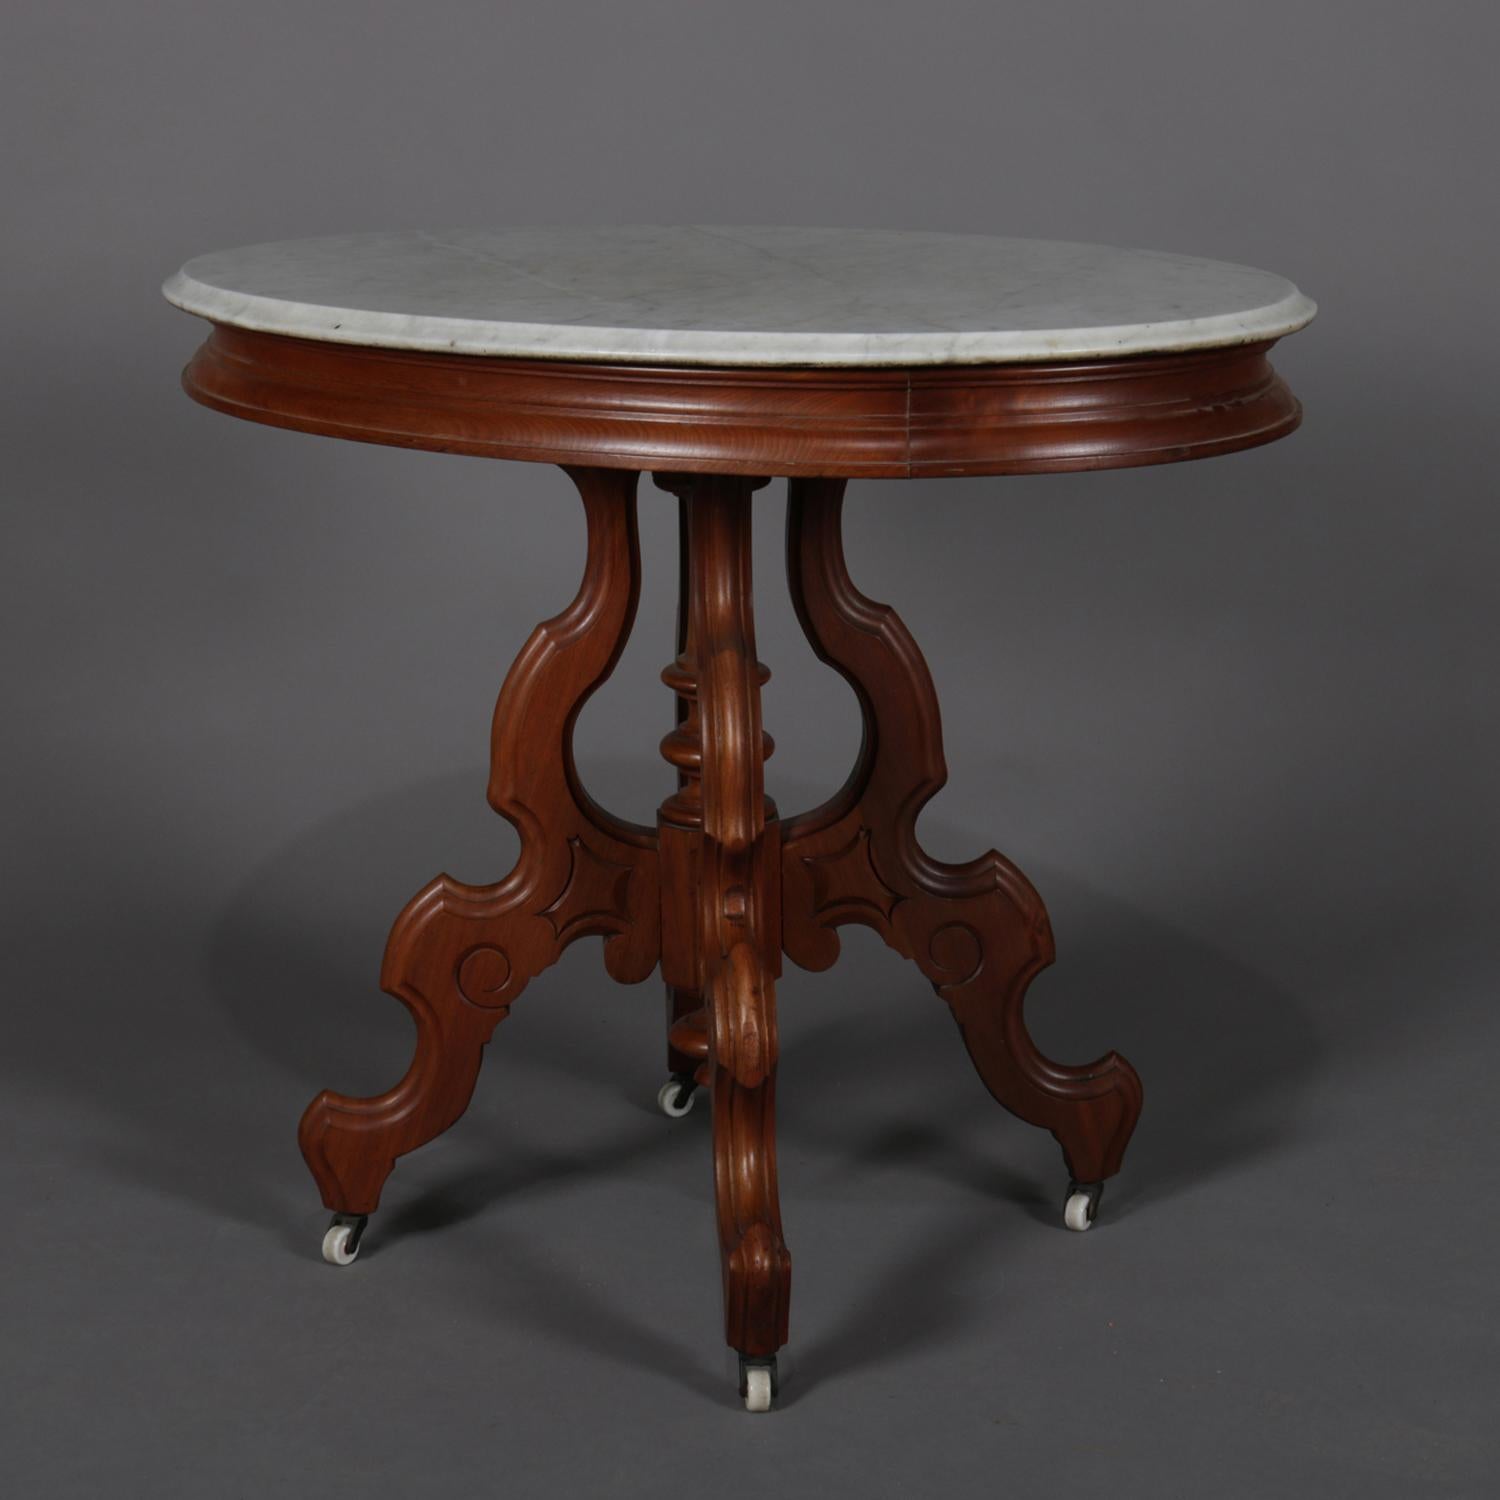 Antique Victorian centre table features oval form with beveled marble top surmounting carved walnut base with four legs and center turned column having drop finial, seated on casters, circa 1890

***DELIVERY NOTICE – Due to COVID-19 we are employing